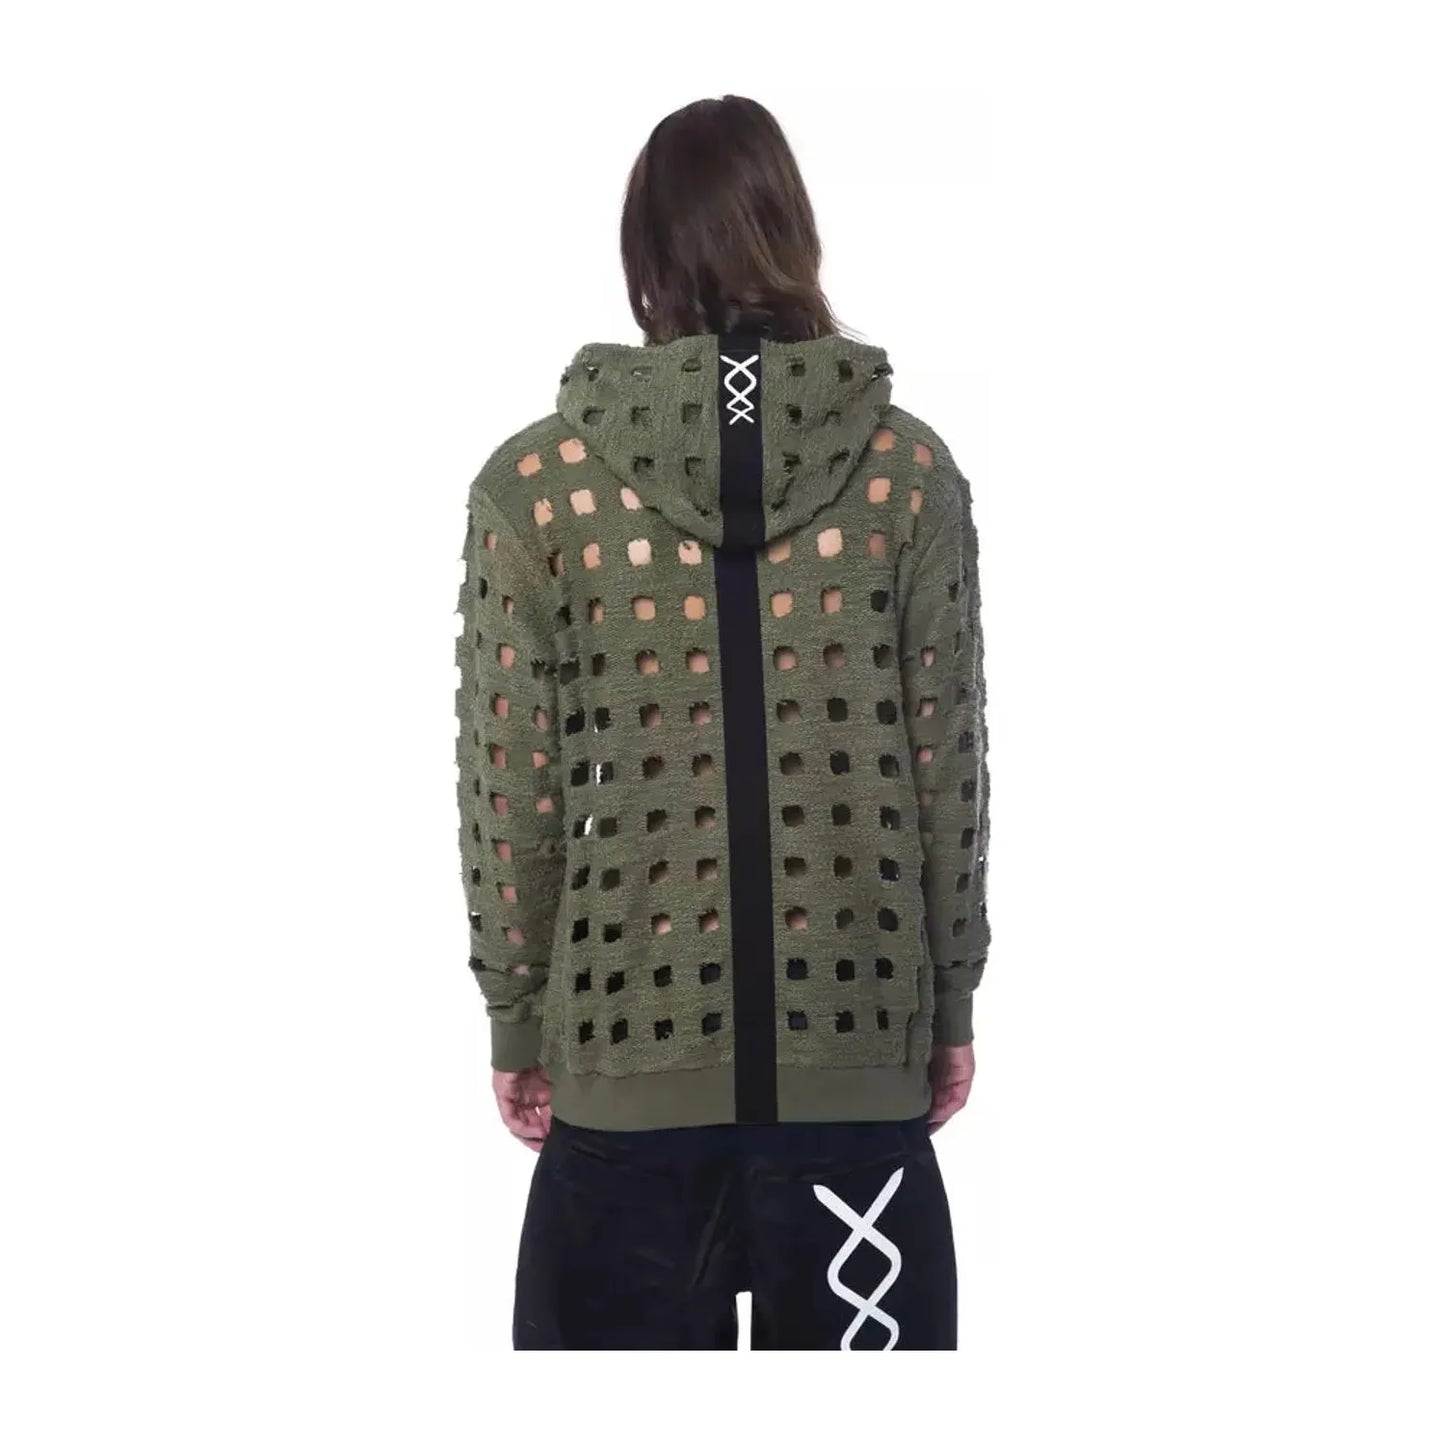 Nicolo Tonetto Army Perforated Cotton Hoodie - Casual Elegance army-sweater stock_product_image_12991_497656546-16-1c4c5cf6-3fb.webp